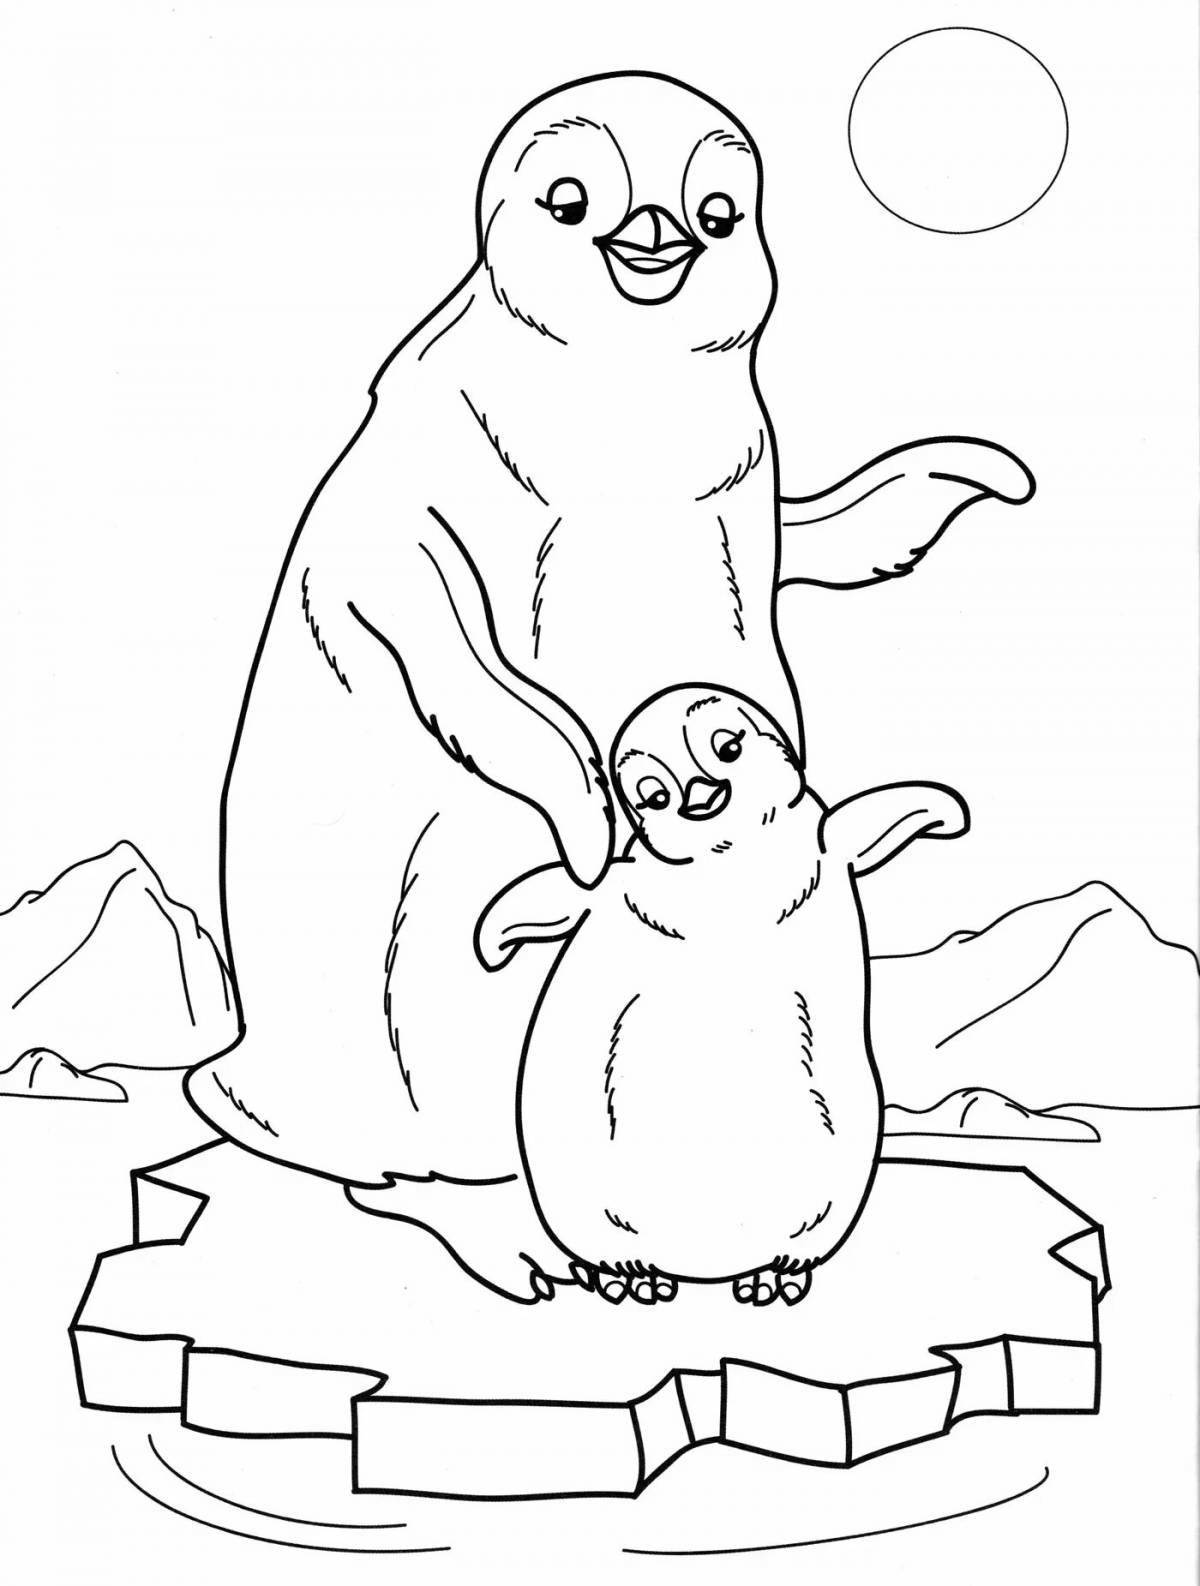 Coloring page adorable penguin on ice